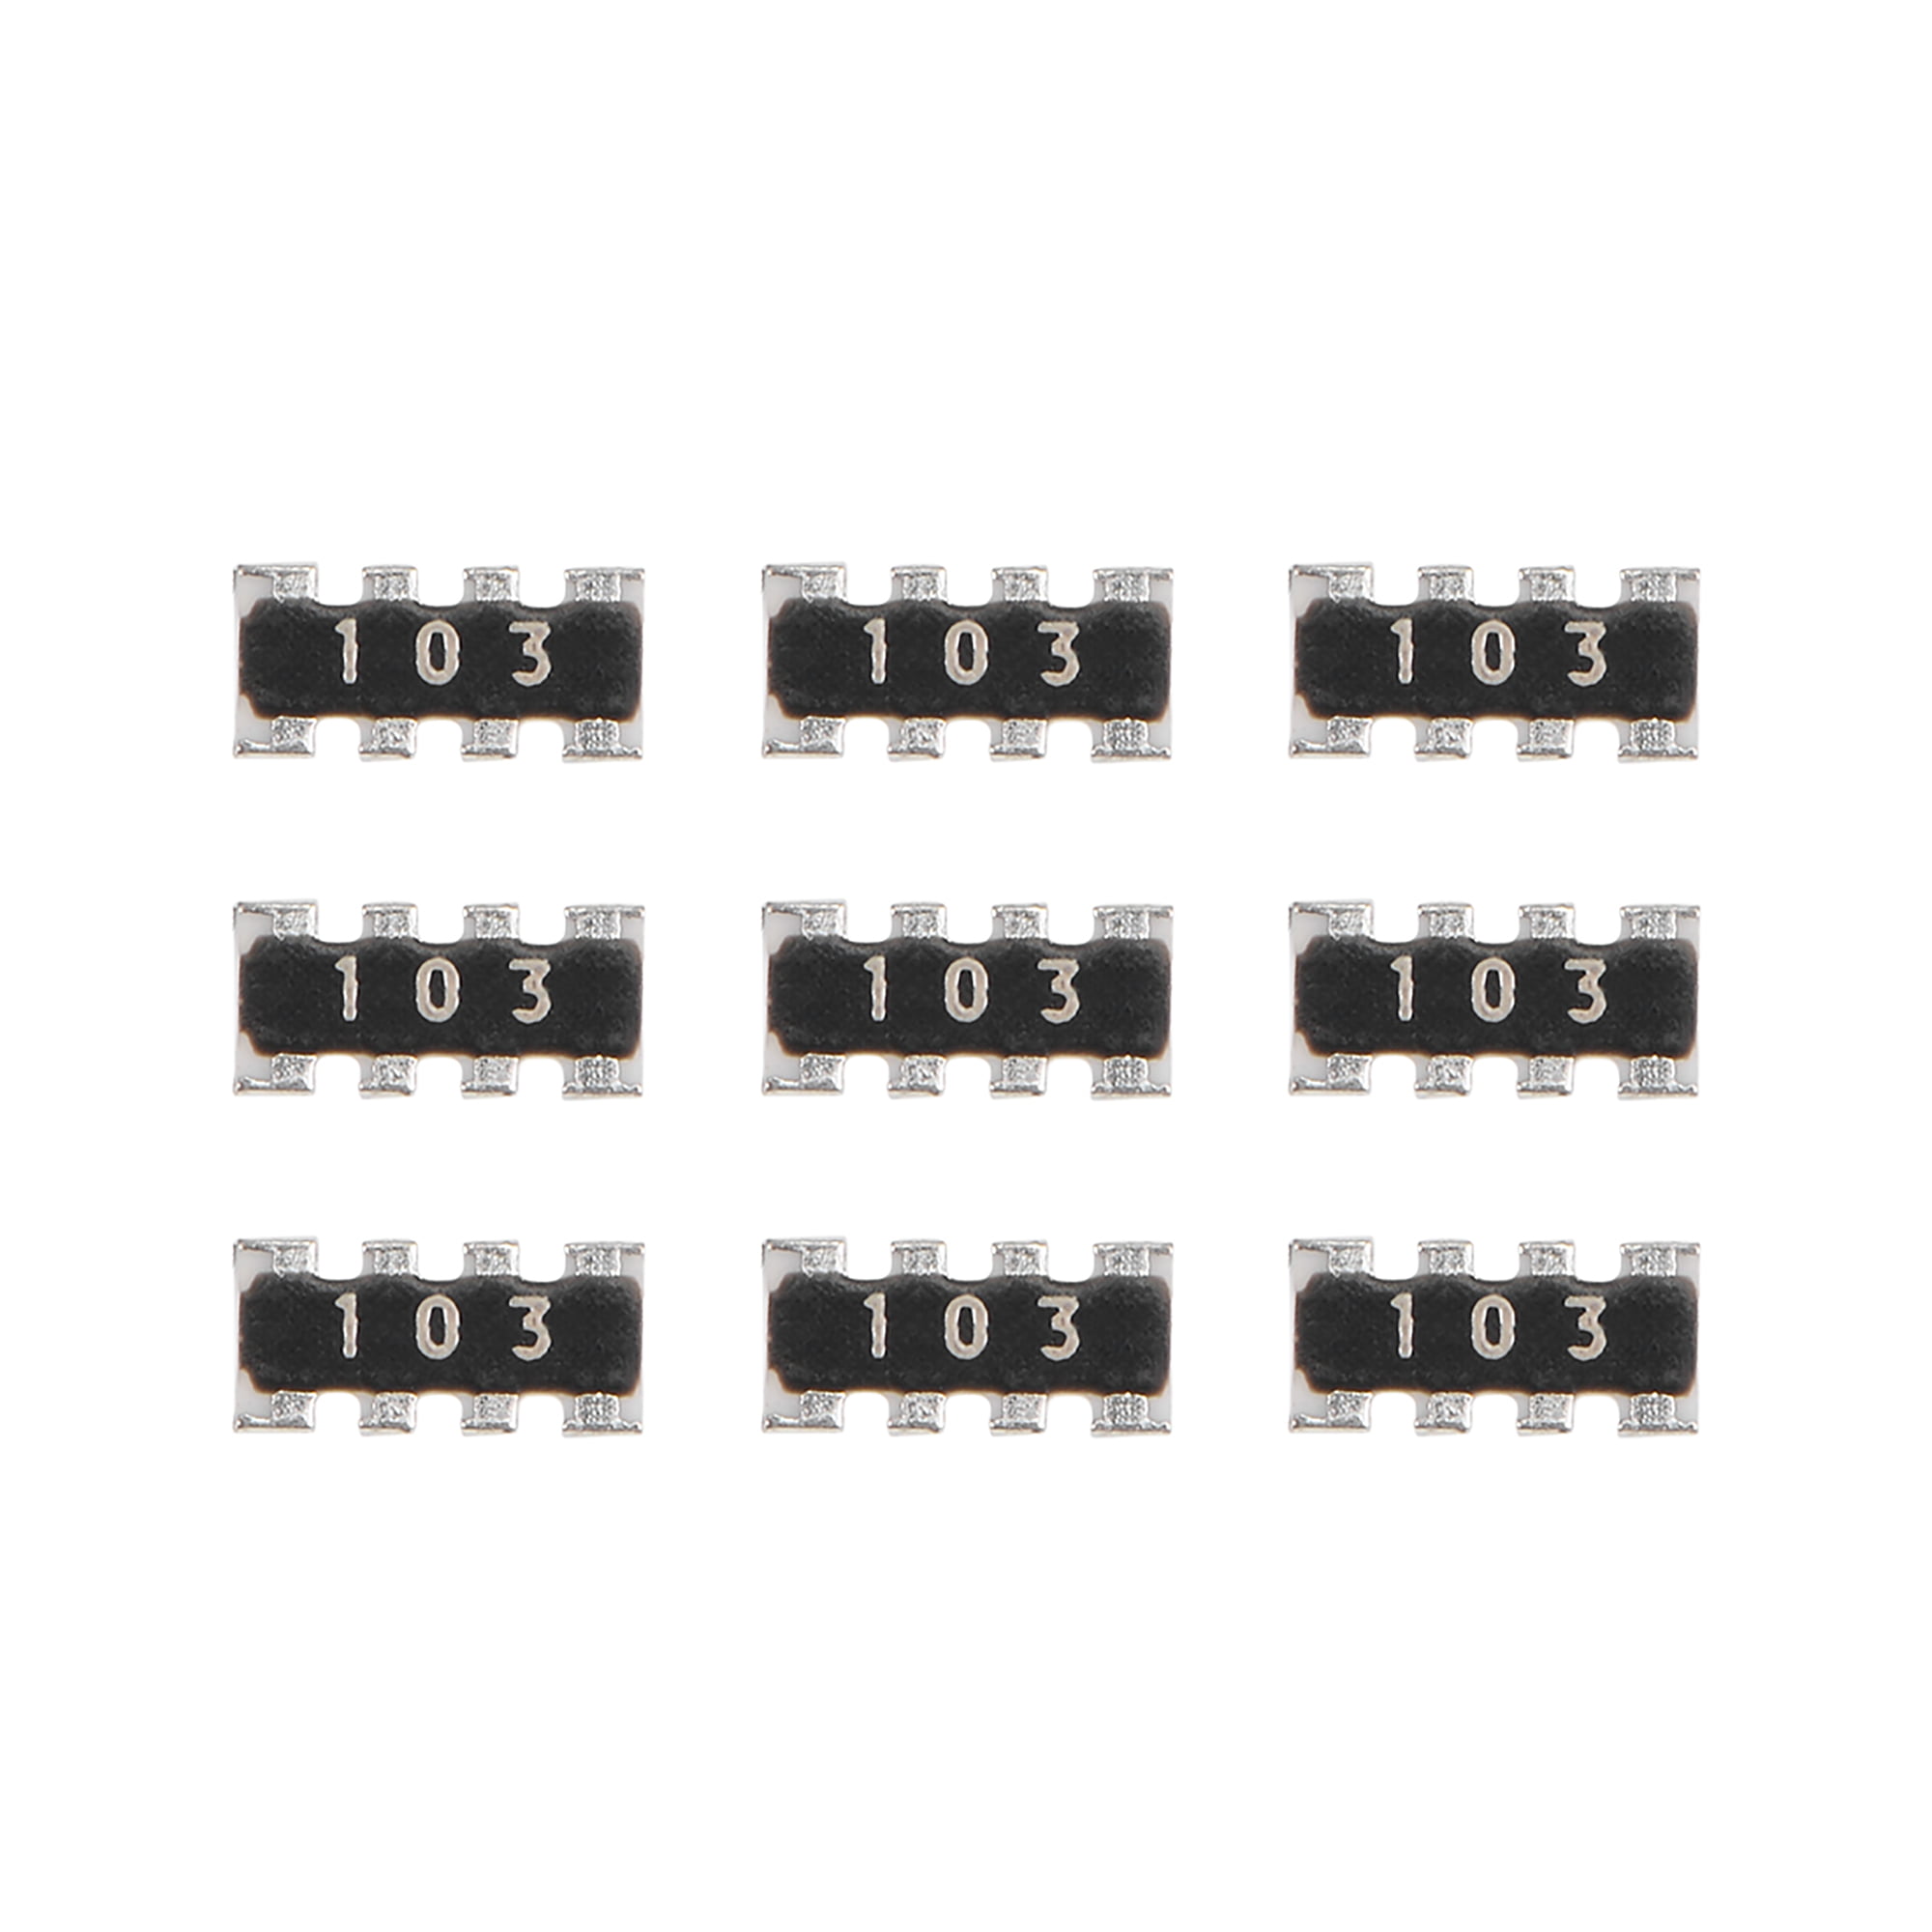 medley disease Discovery 10K Ohm Resistor Network, DIP-8 Array 0.8mm Pitch Isolated Type 5%  Tolerance 100pcs - Walmart.com